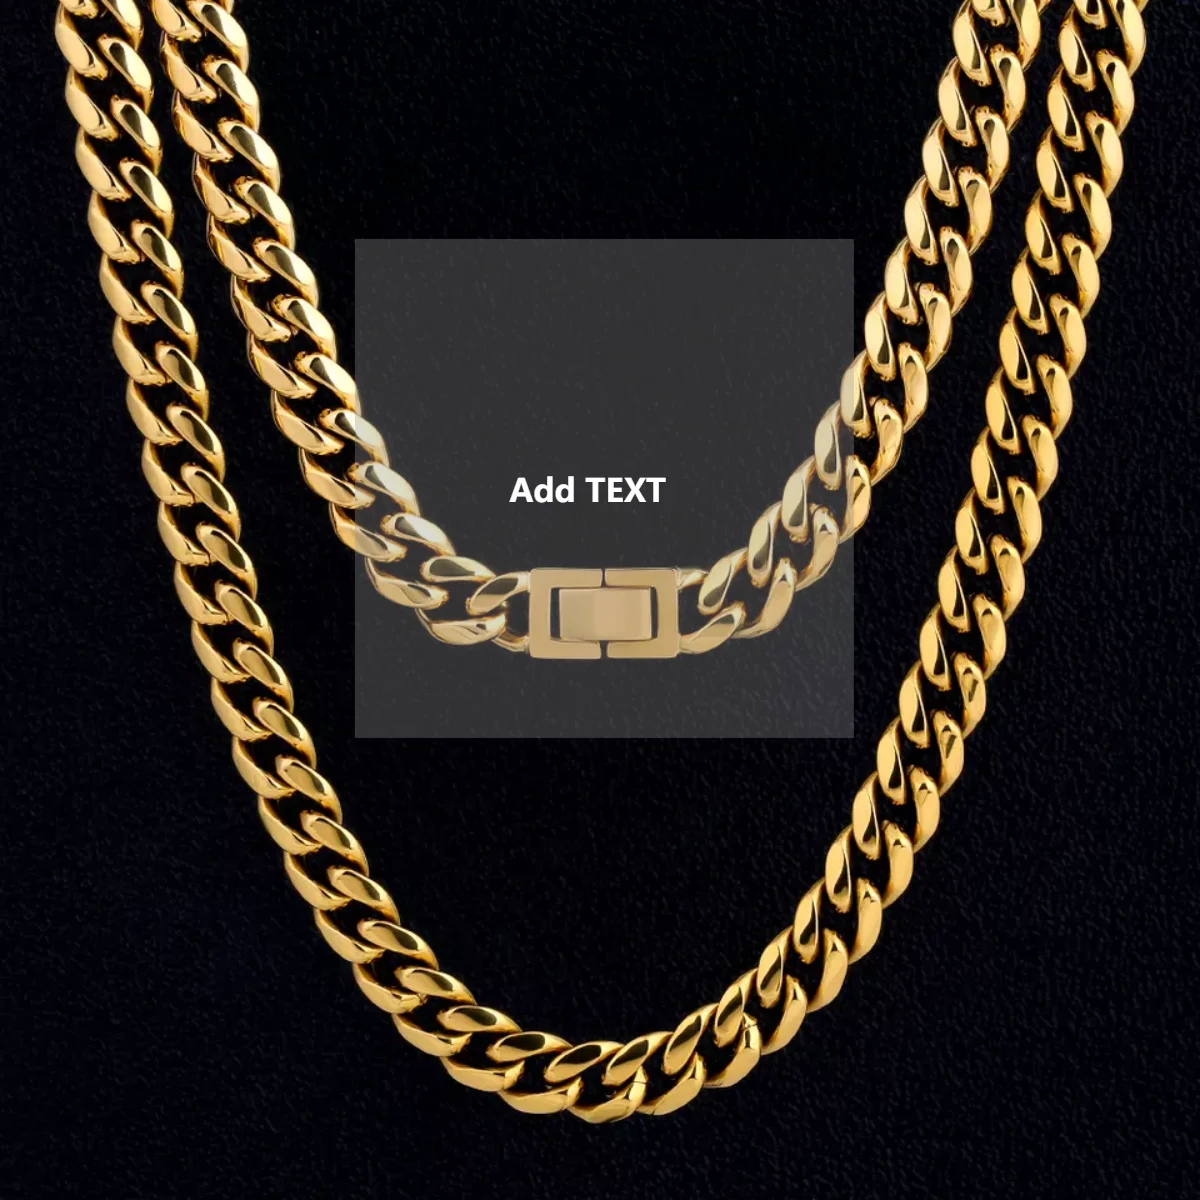 Miami Curb Chains Hip Hop Jewelry for Men Homme 18K Gold Plated Men’s Stainless Steel Necklace KRKC&CO 12mm/14mm Cuban Link Chain Flat Chains Anti-Tarnish Anti-Allergies 